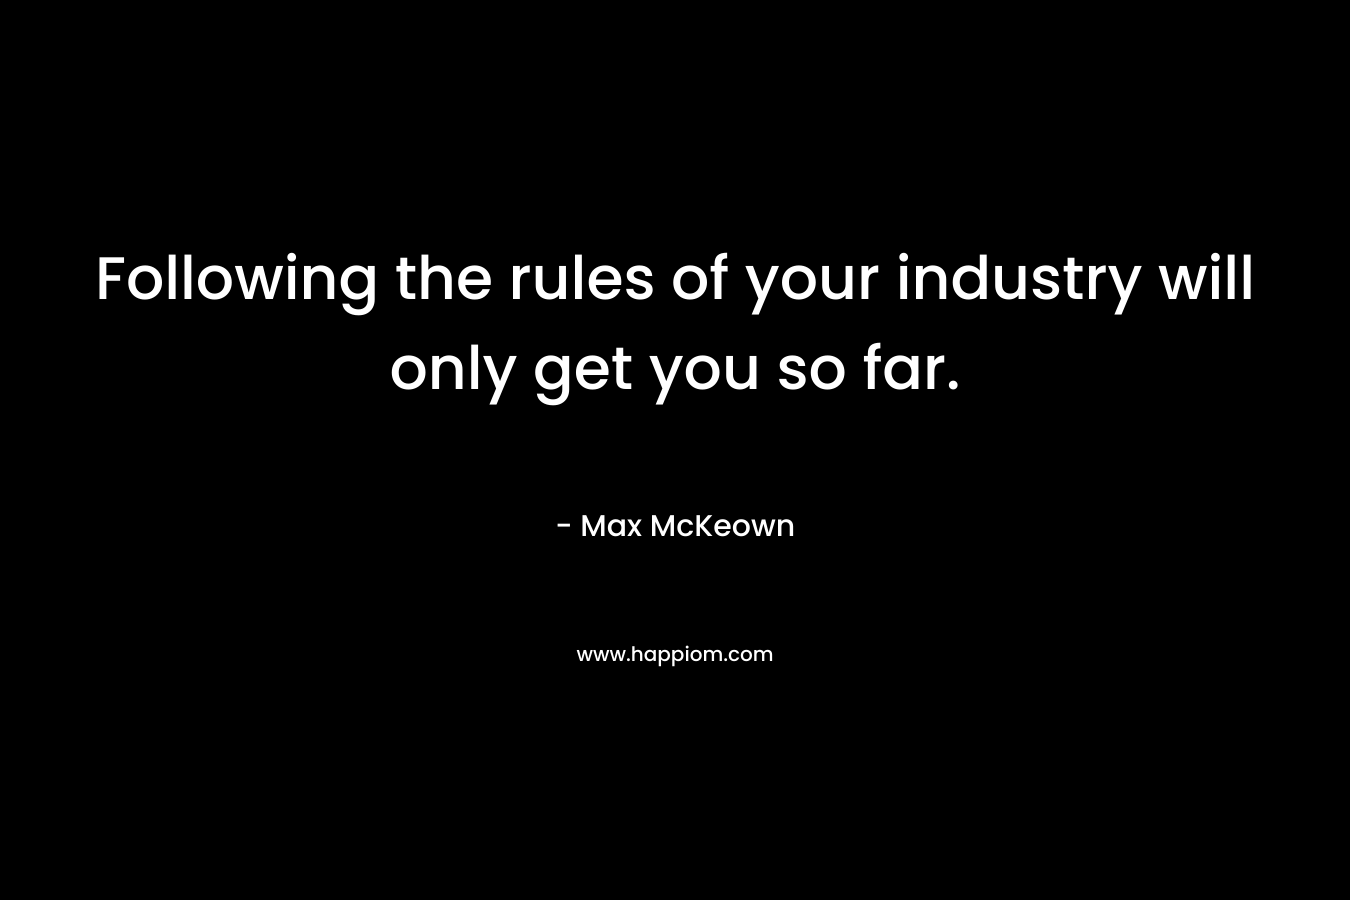 Following the rules of your industry will only get you so far. – Max McKeown